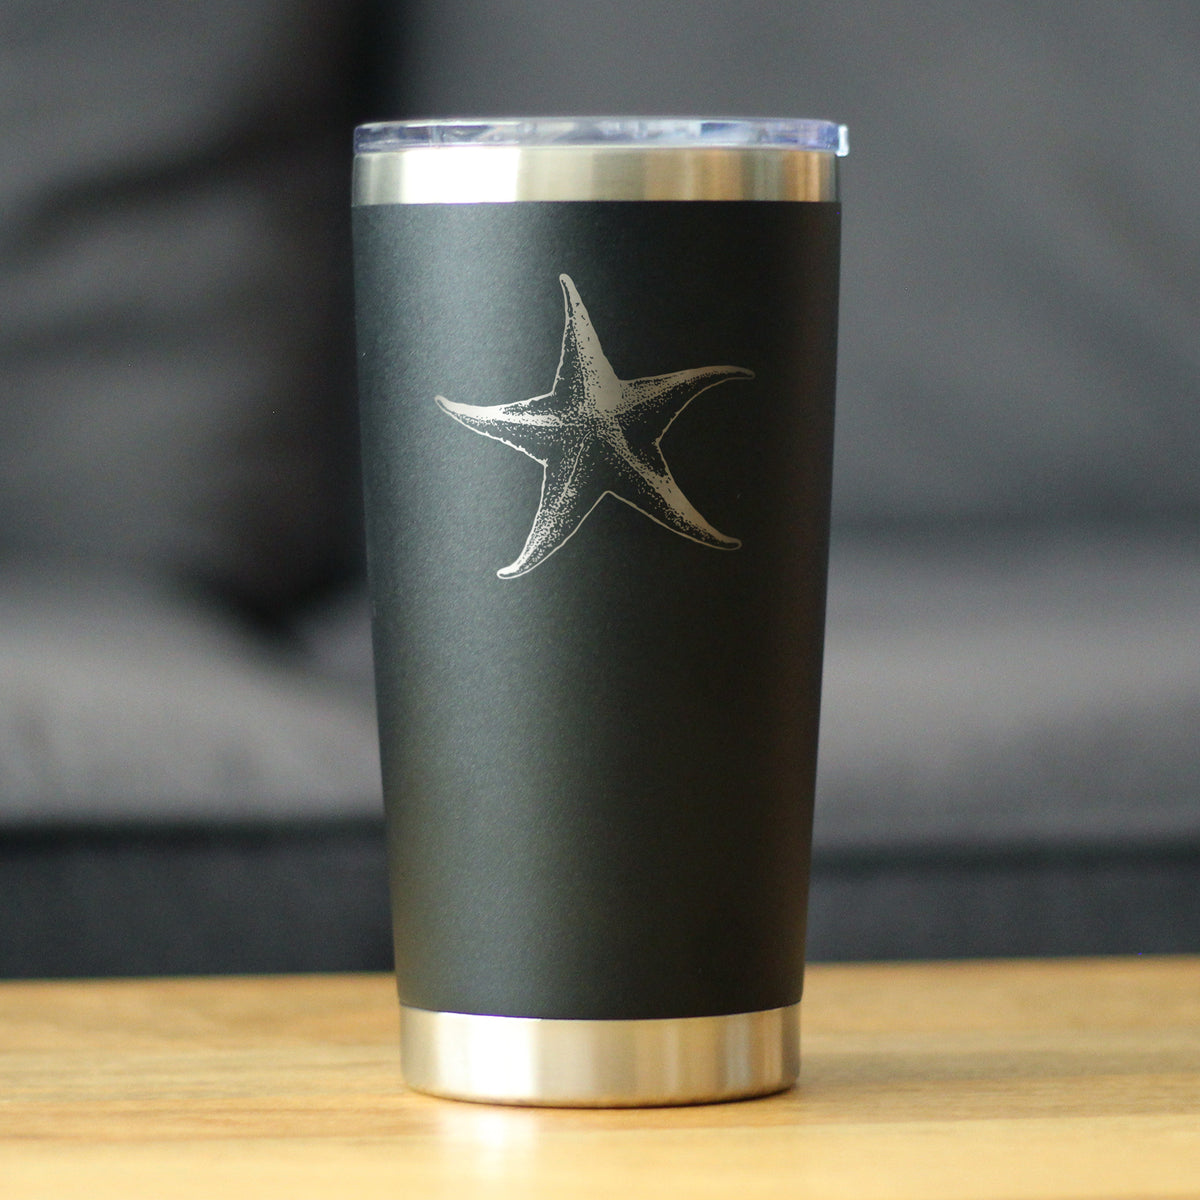 Starfish - Insulated Coffee Tumbler Cup with Sliding Lid - Stainless Steel Travel Mug - Unique Ocean Gifts for Women and Men